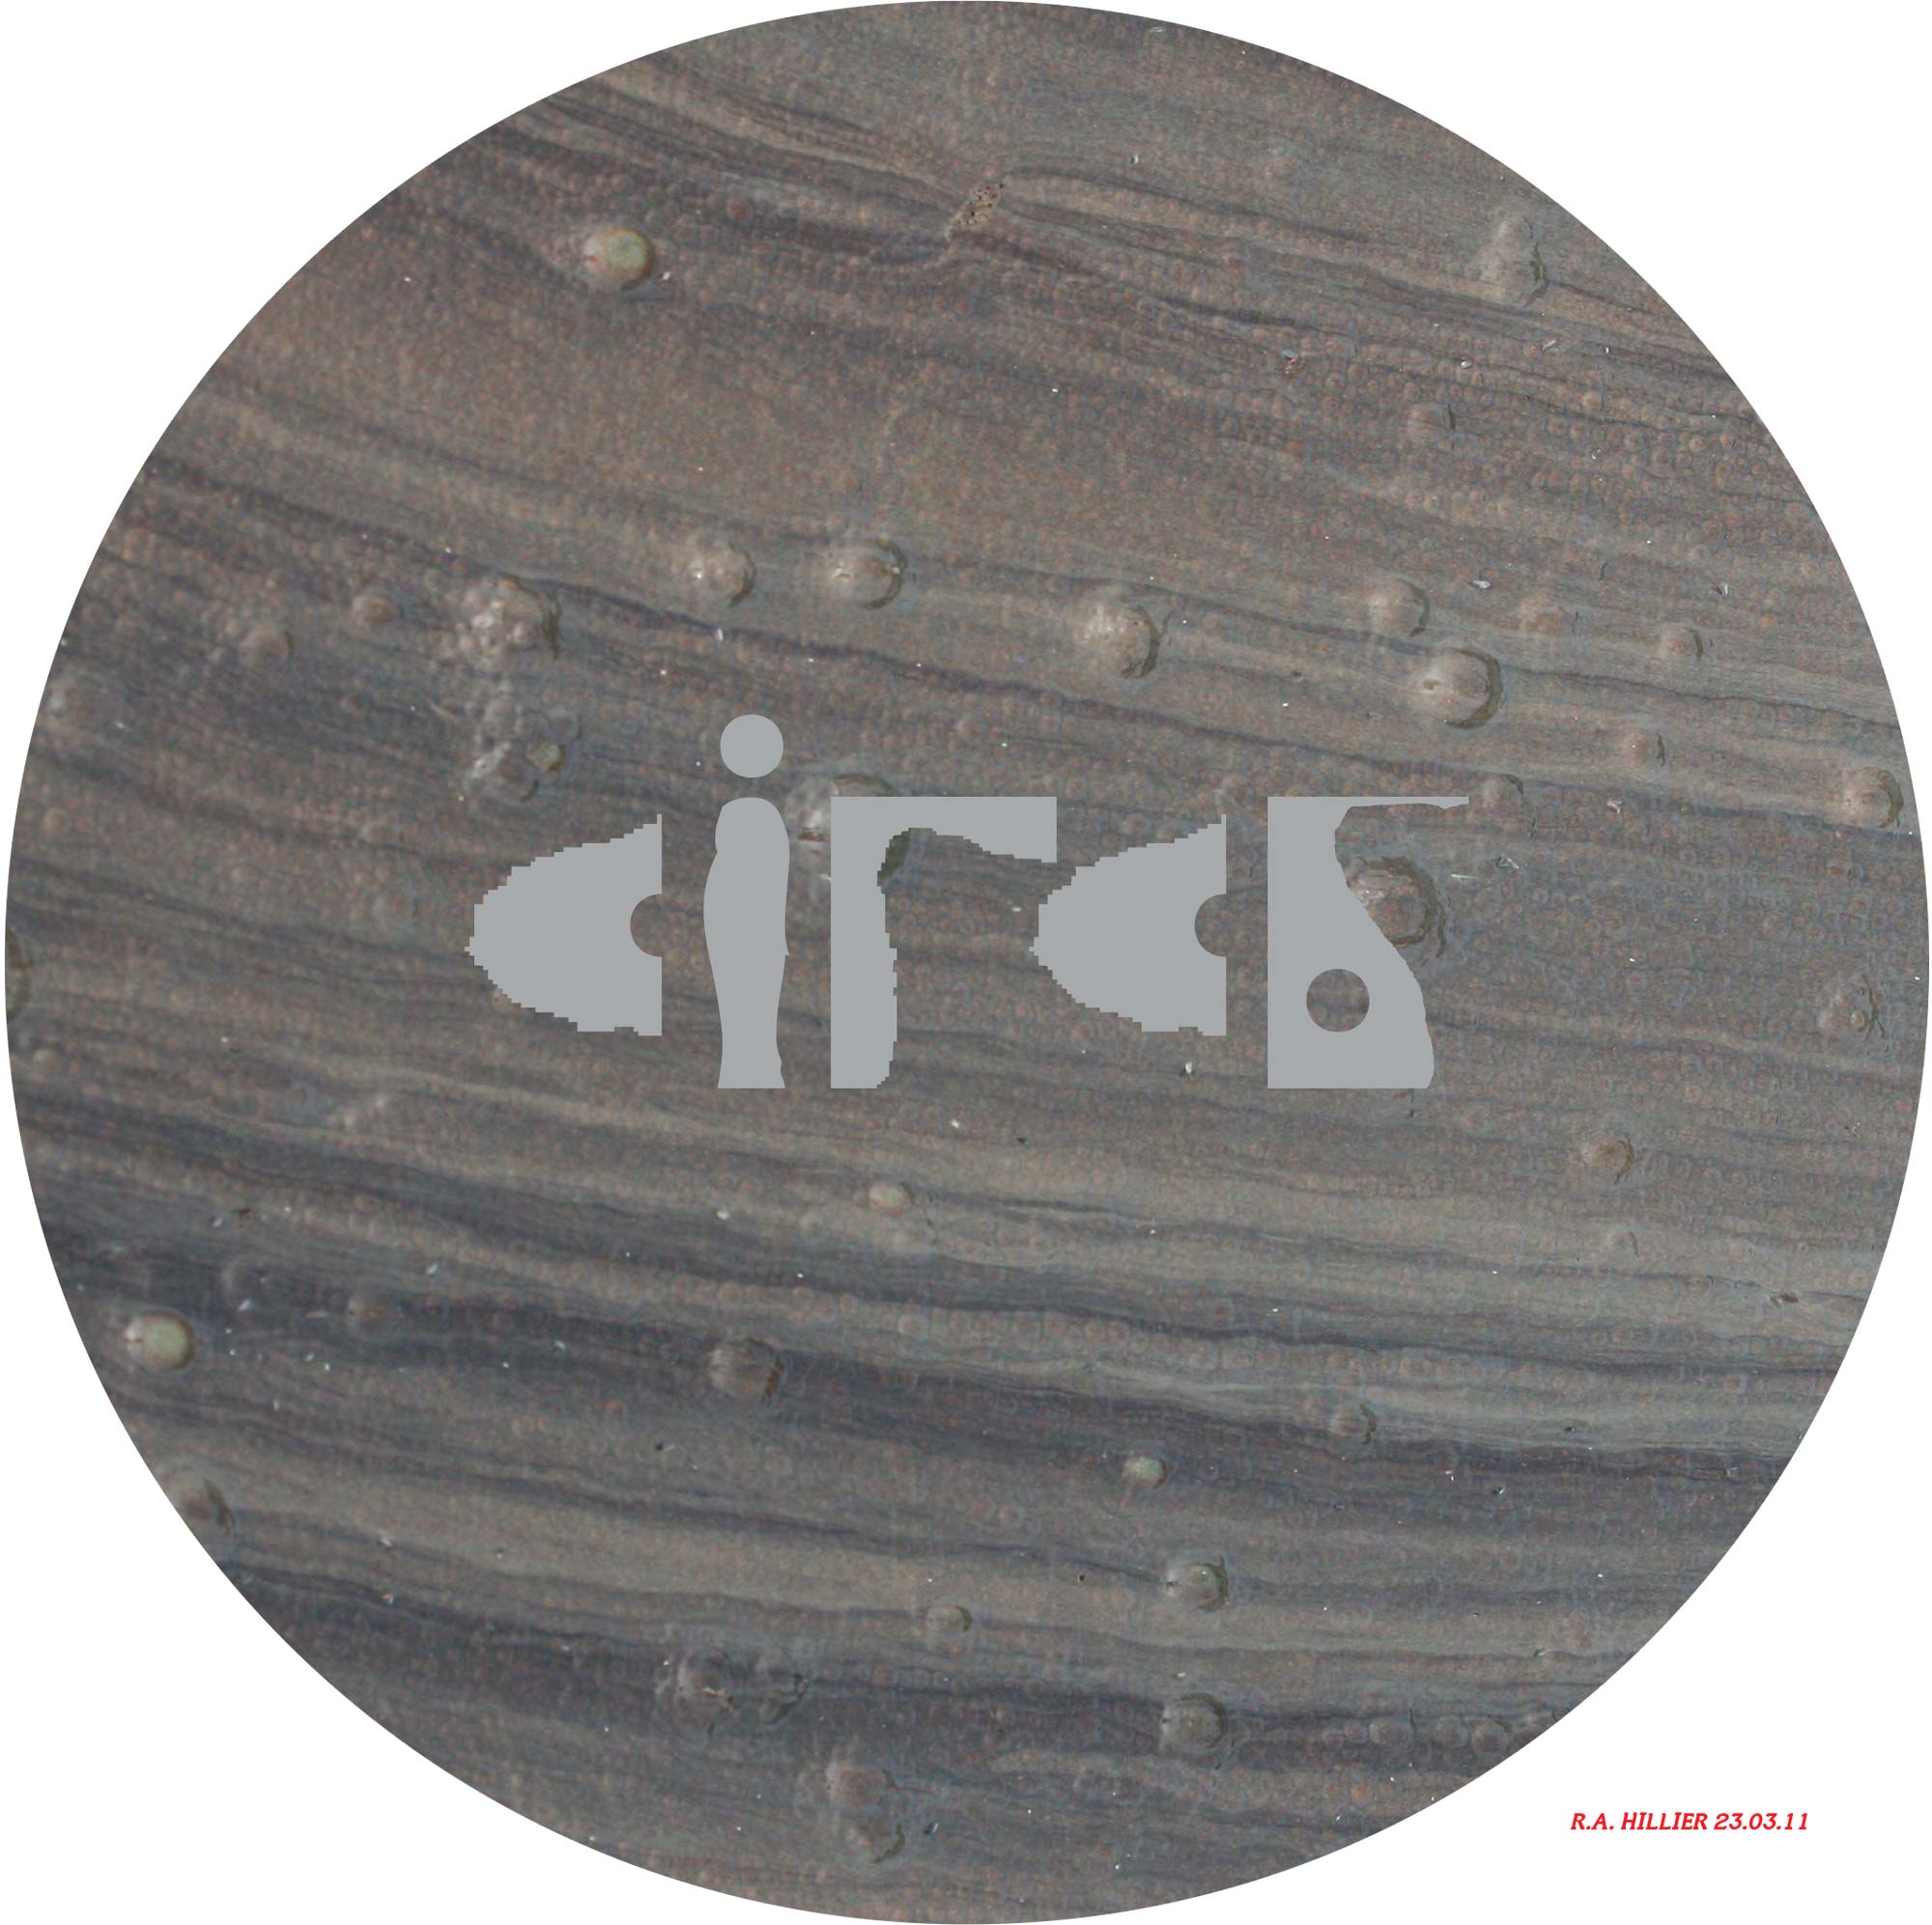 A circle with a wood background on a white square page, shows the text ‘CIRCS’ in the middle made out of inkblot splashes